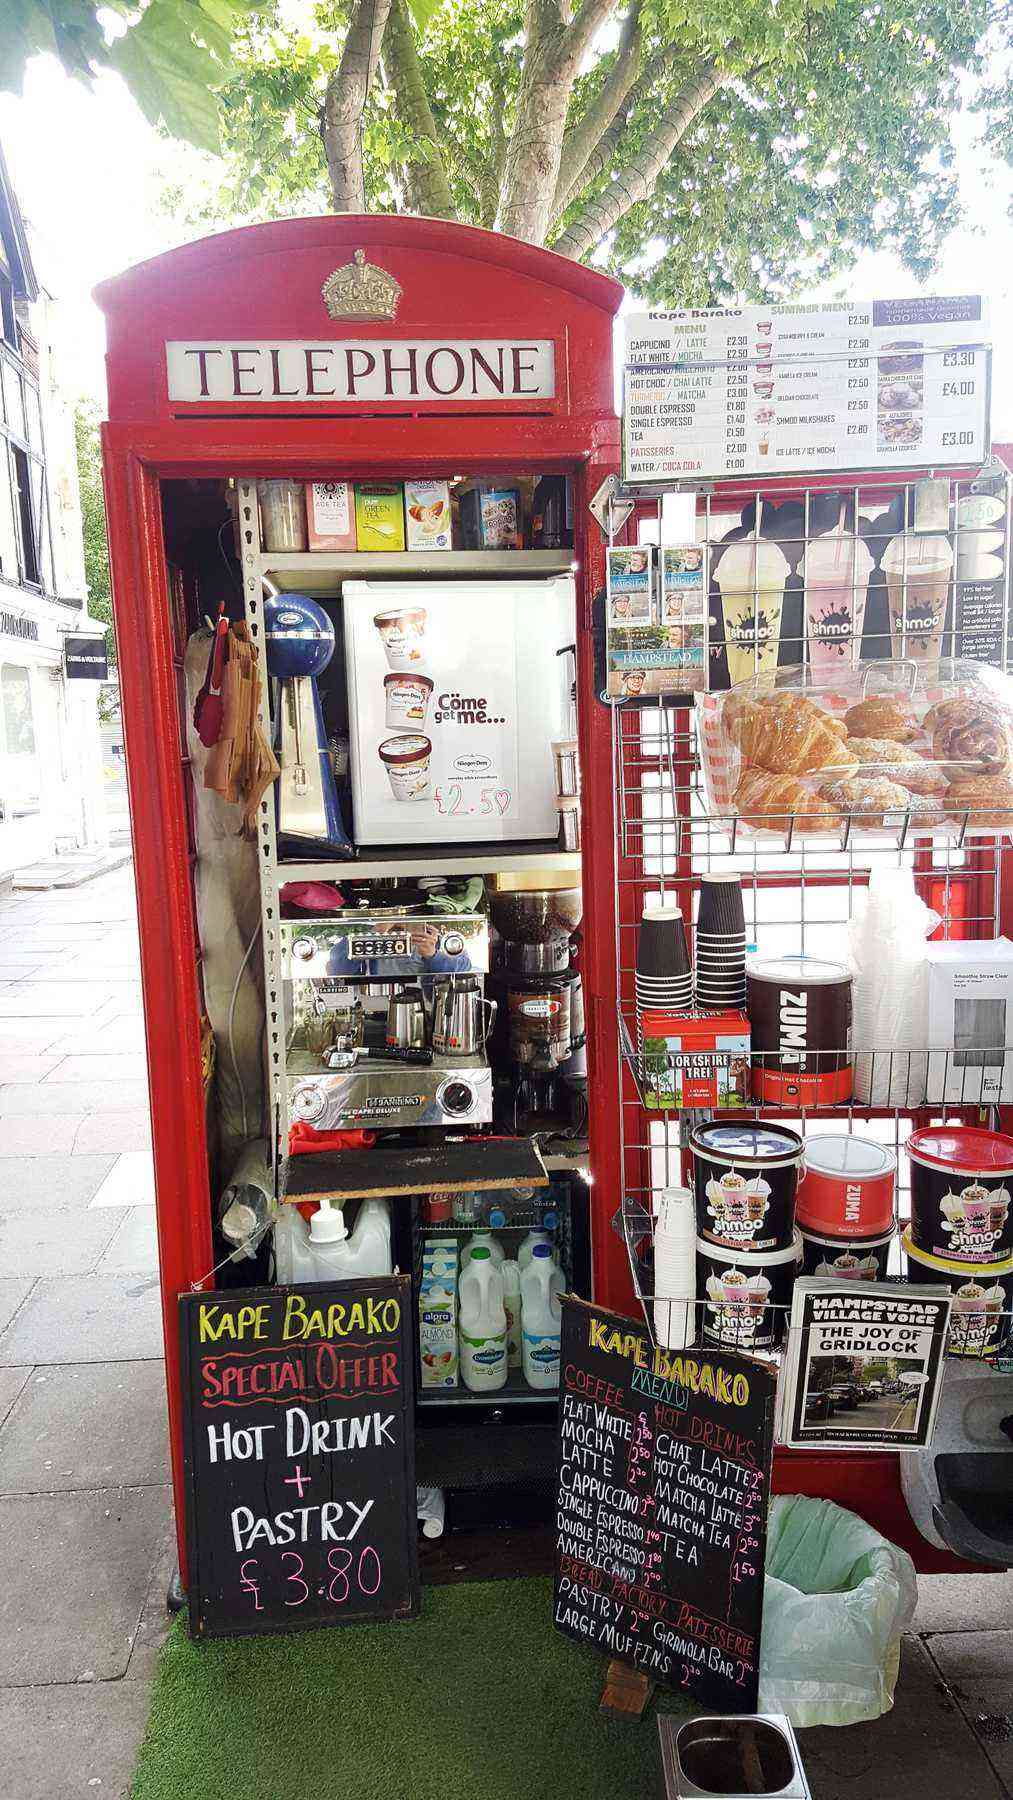 On Hampstead High Street in North London, the family-run Kape Barako coffee kiosk may look tiny, but it packs a lot into a small space. The miniature café serves strong espresso drinks, tea, cakes, milkshakes, sandwiches, and pastries, and has gained quite a cult following since opening last year. It’s obviously standing room only though.